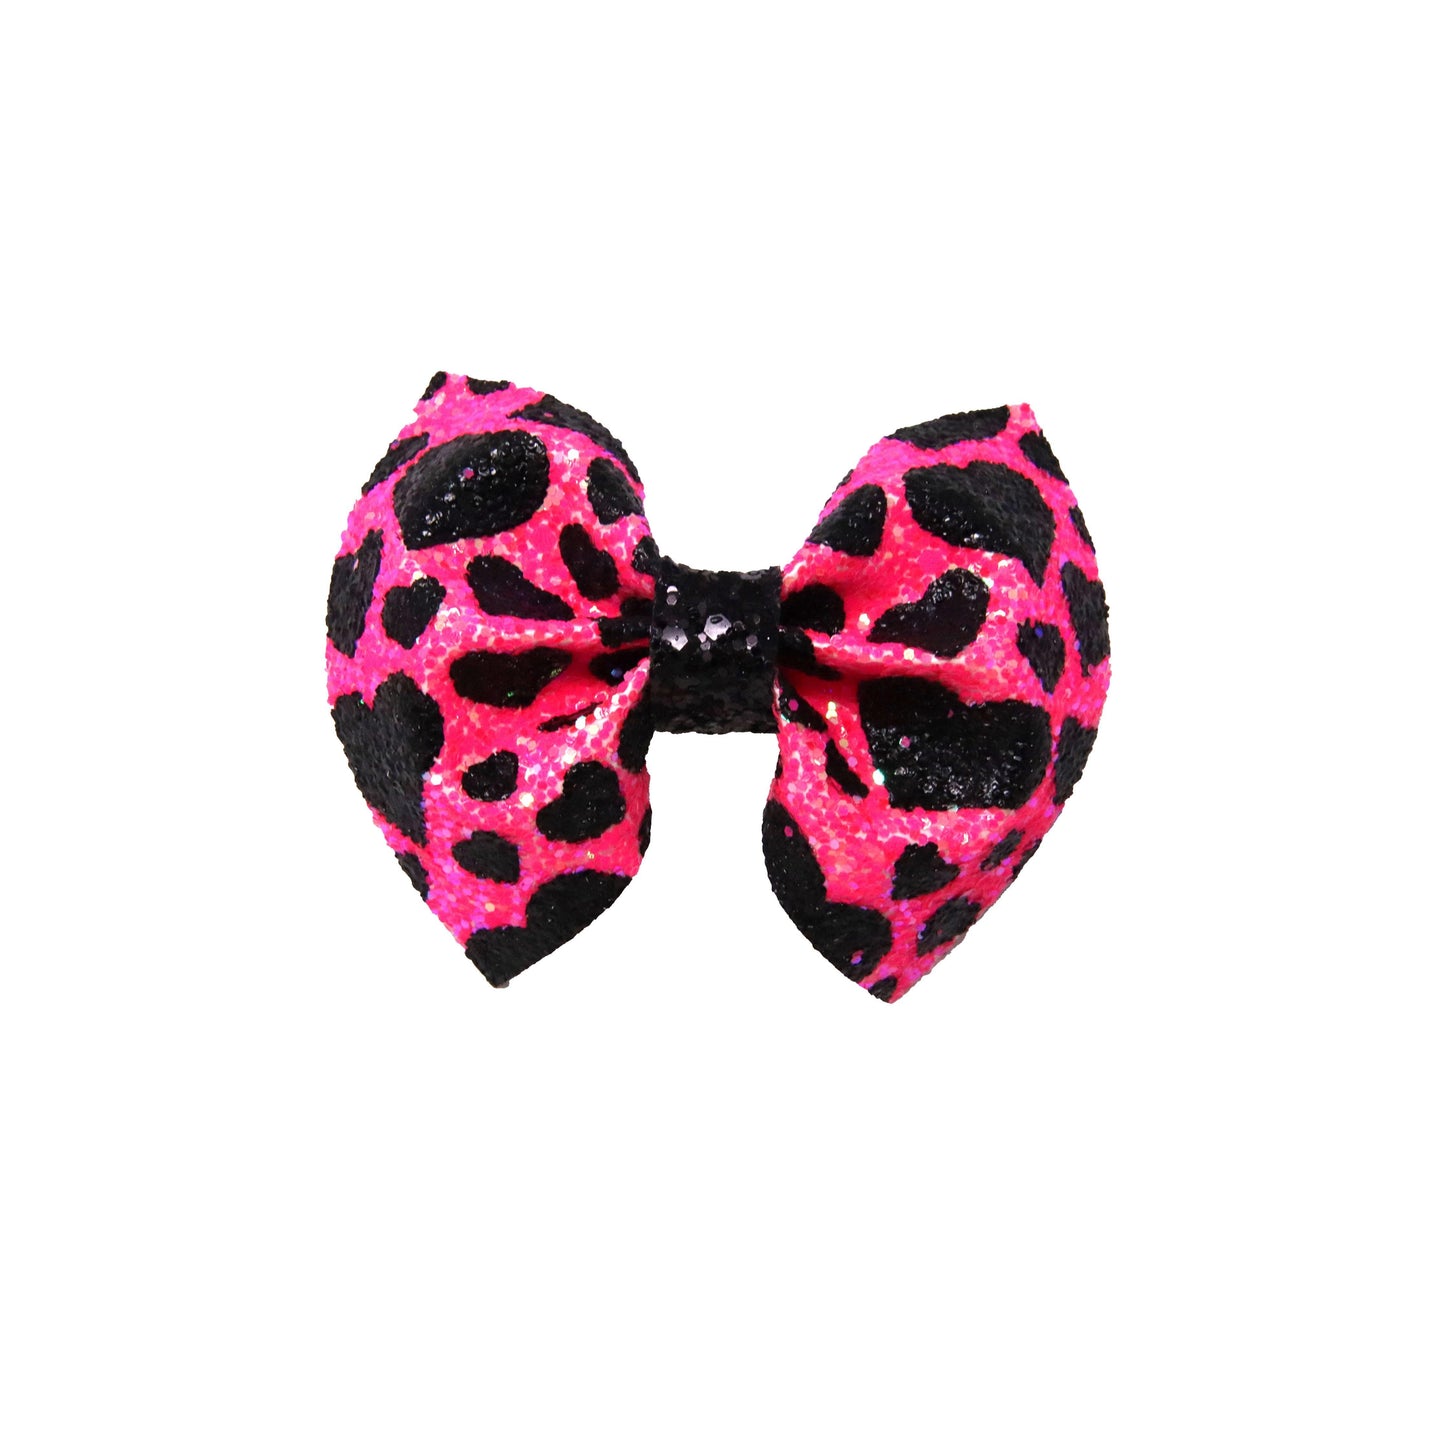 4 inch Black Hearts on Pink Glitter Pinch Bow